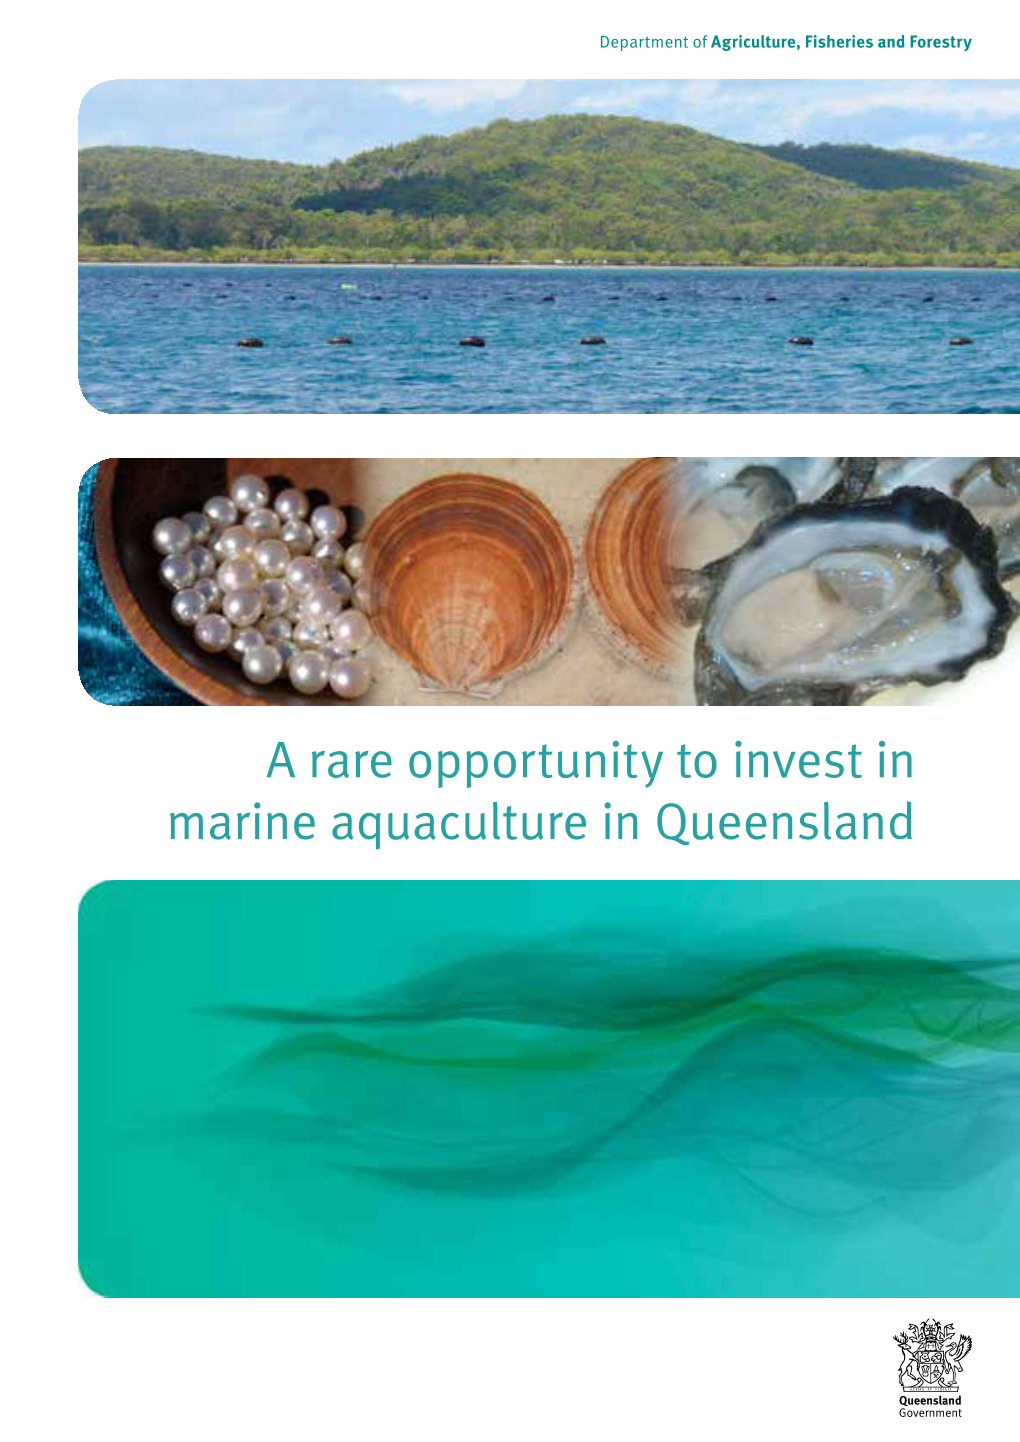 A Rare Opportunity to Invest in Marine Aquaculture in Queensland